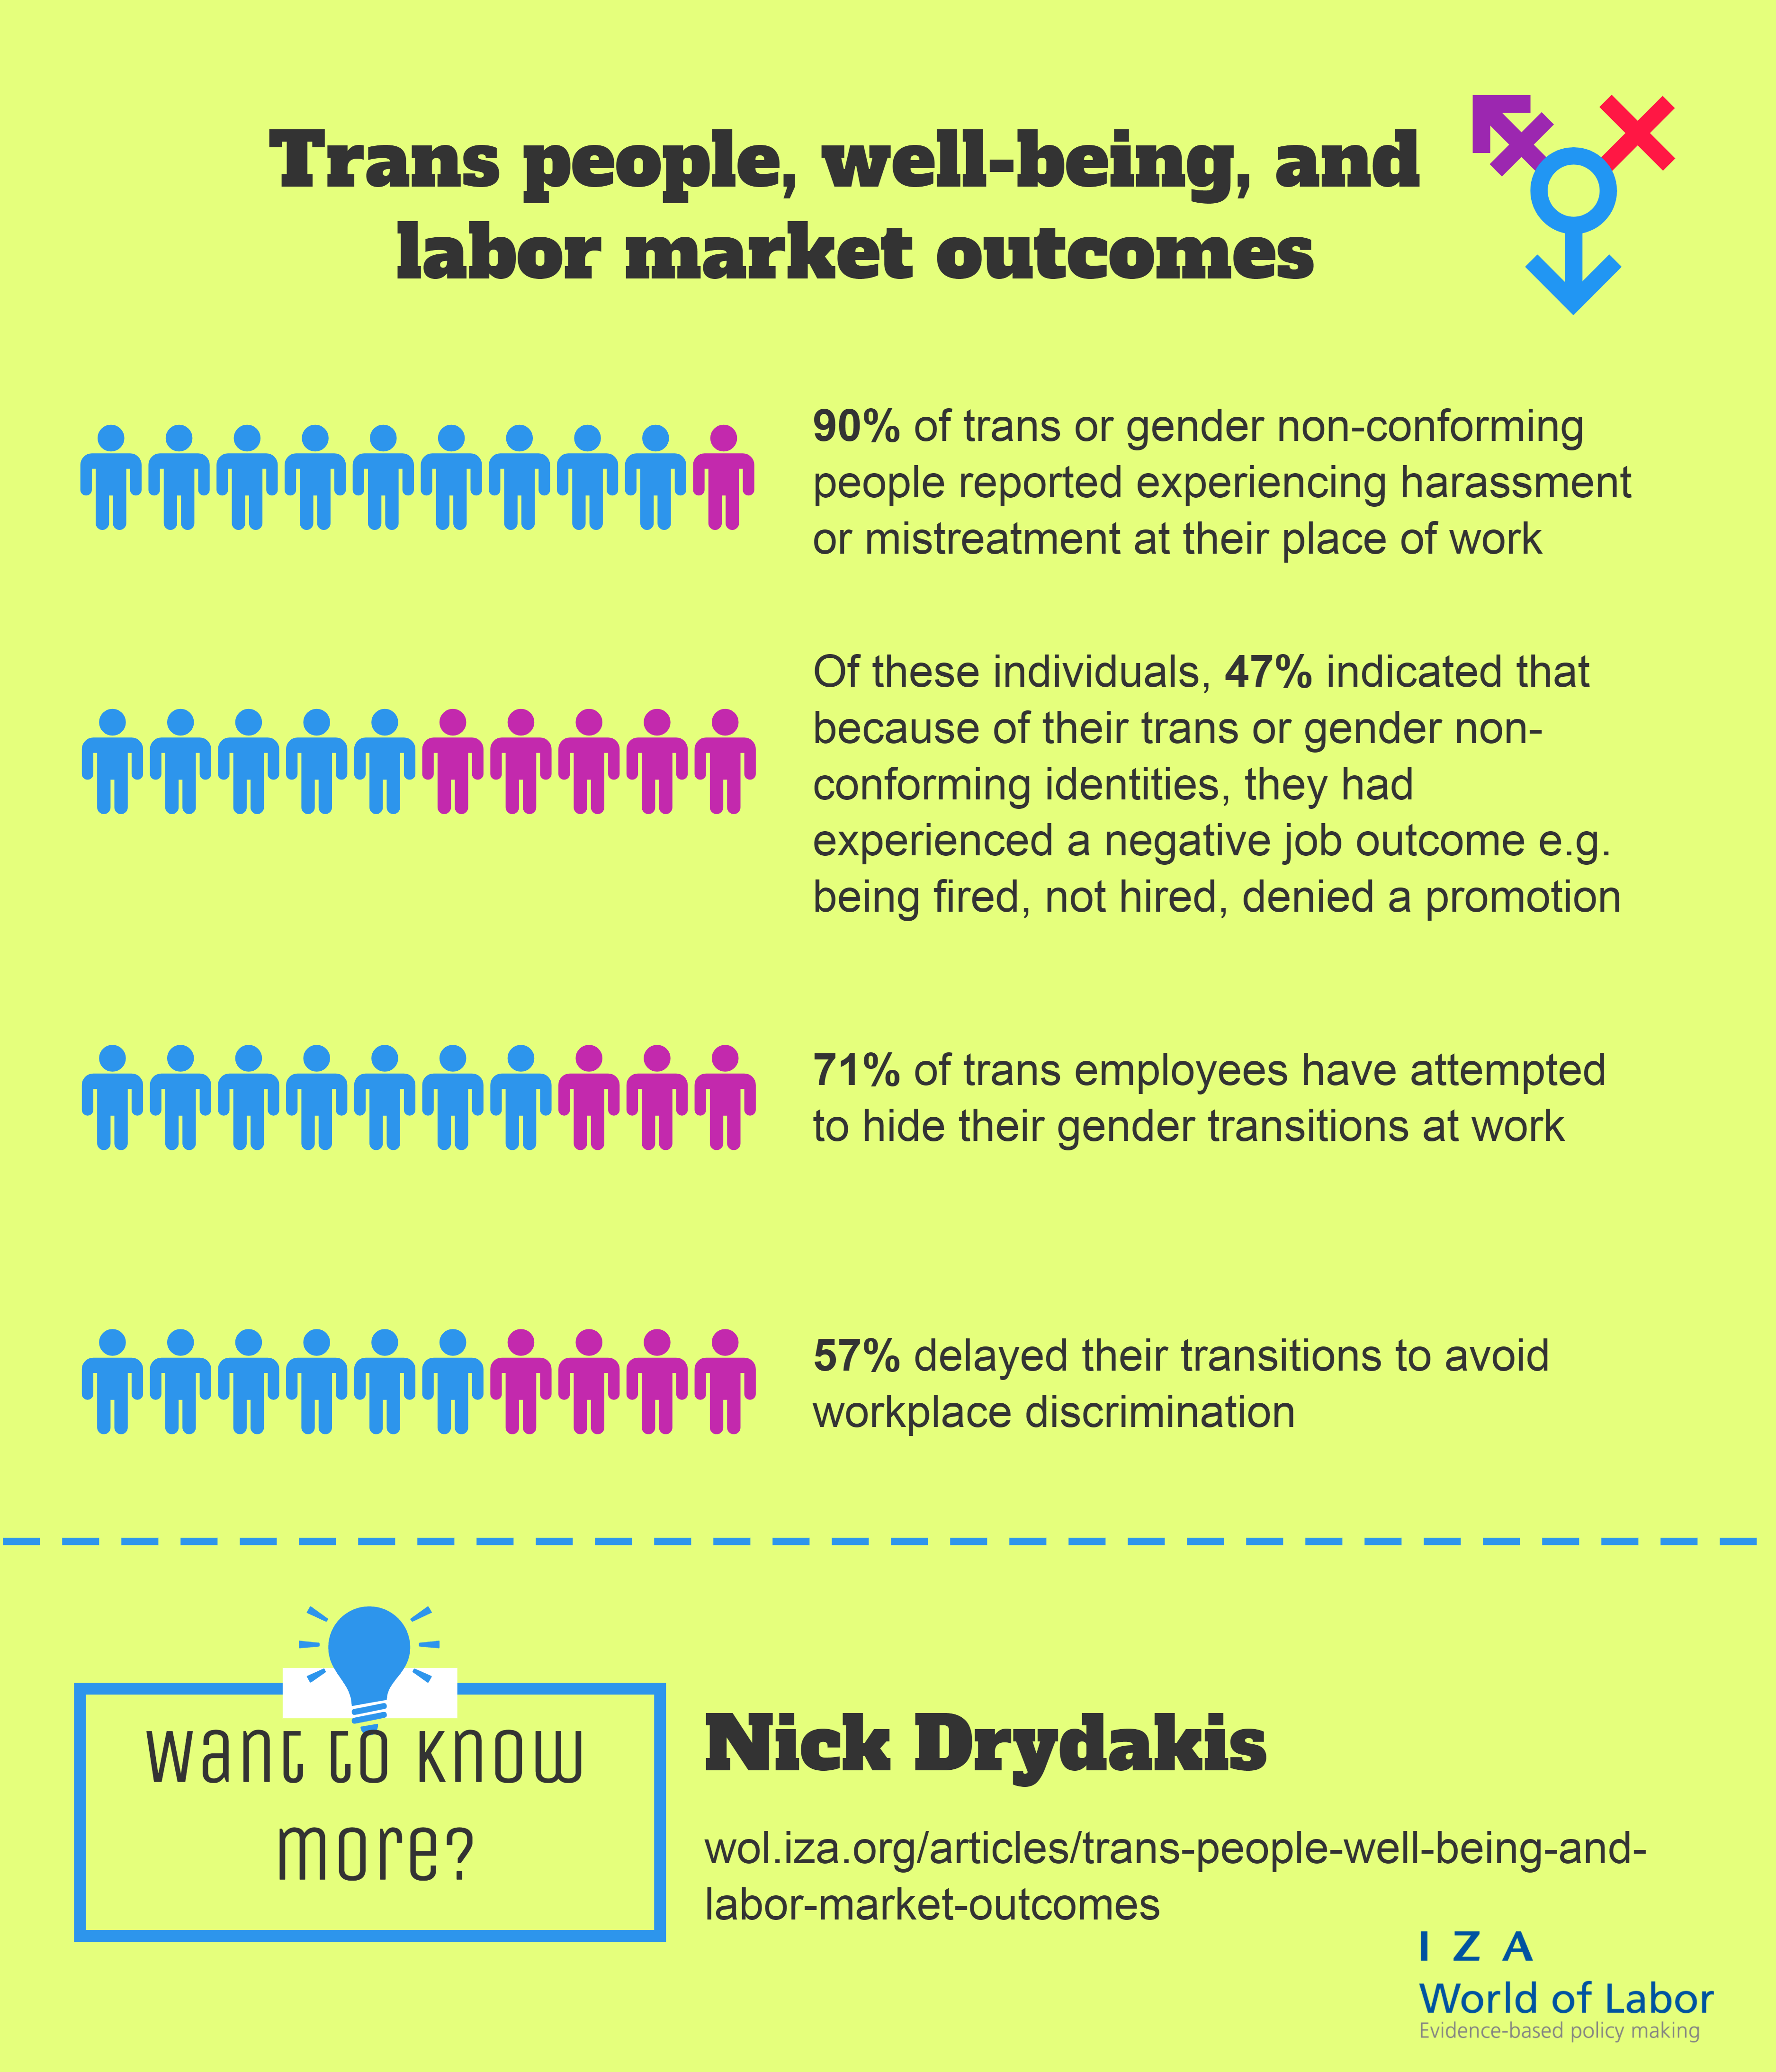 NEW REPORT: Transitioning across gender is related to greater life and job satisfaction